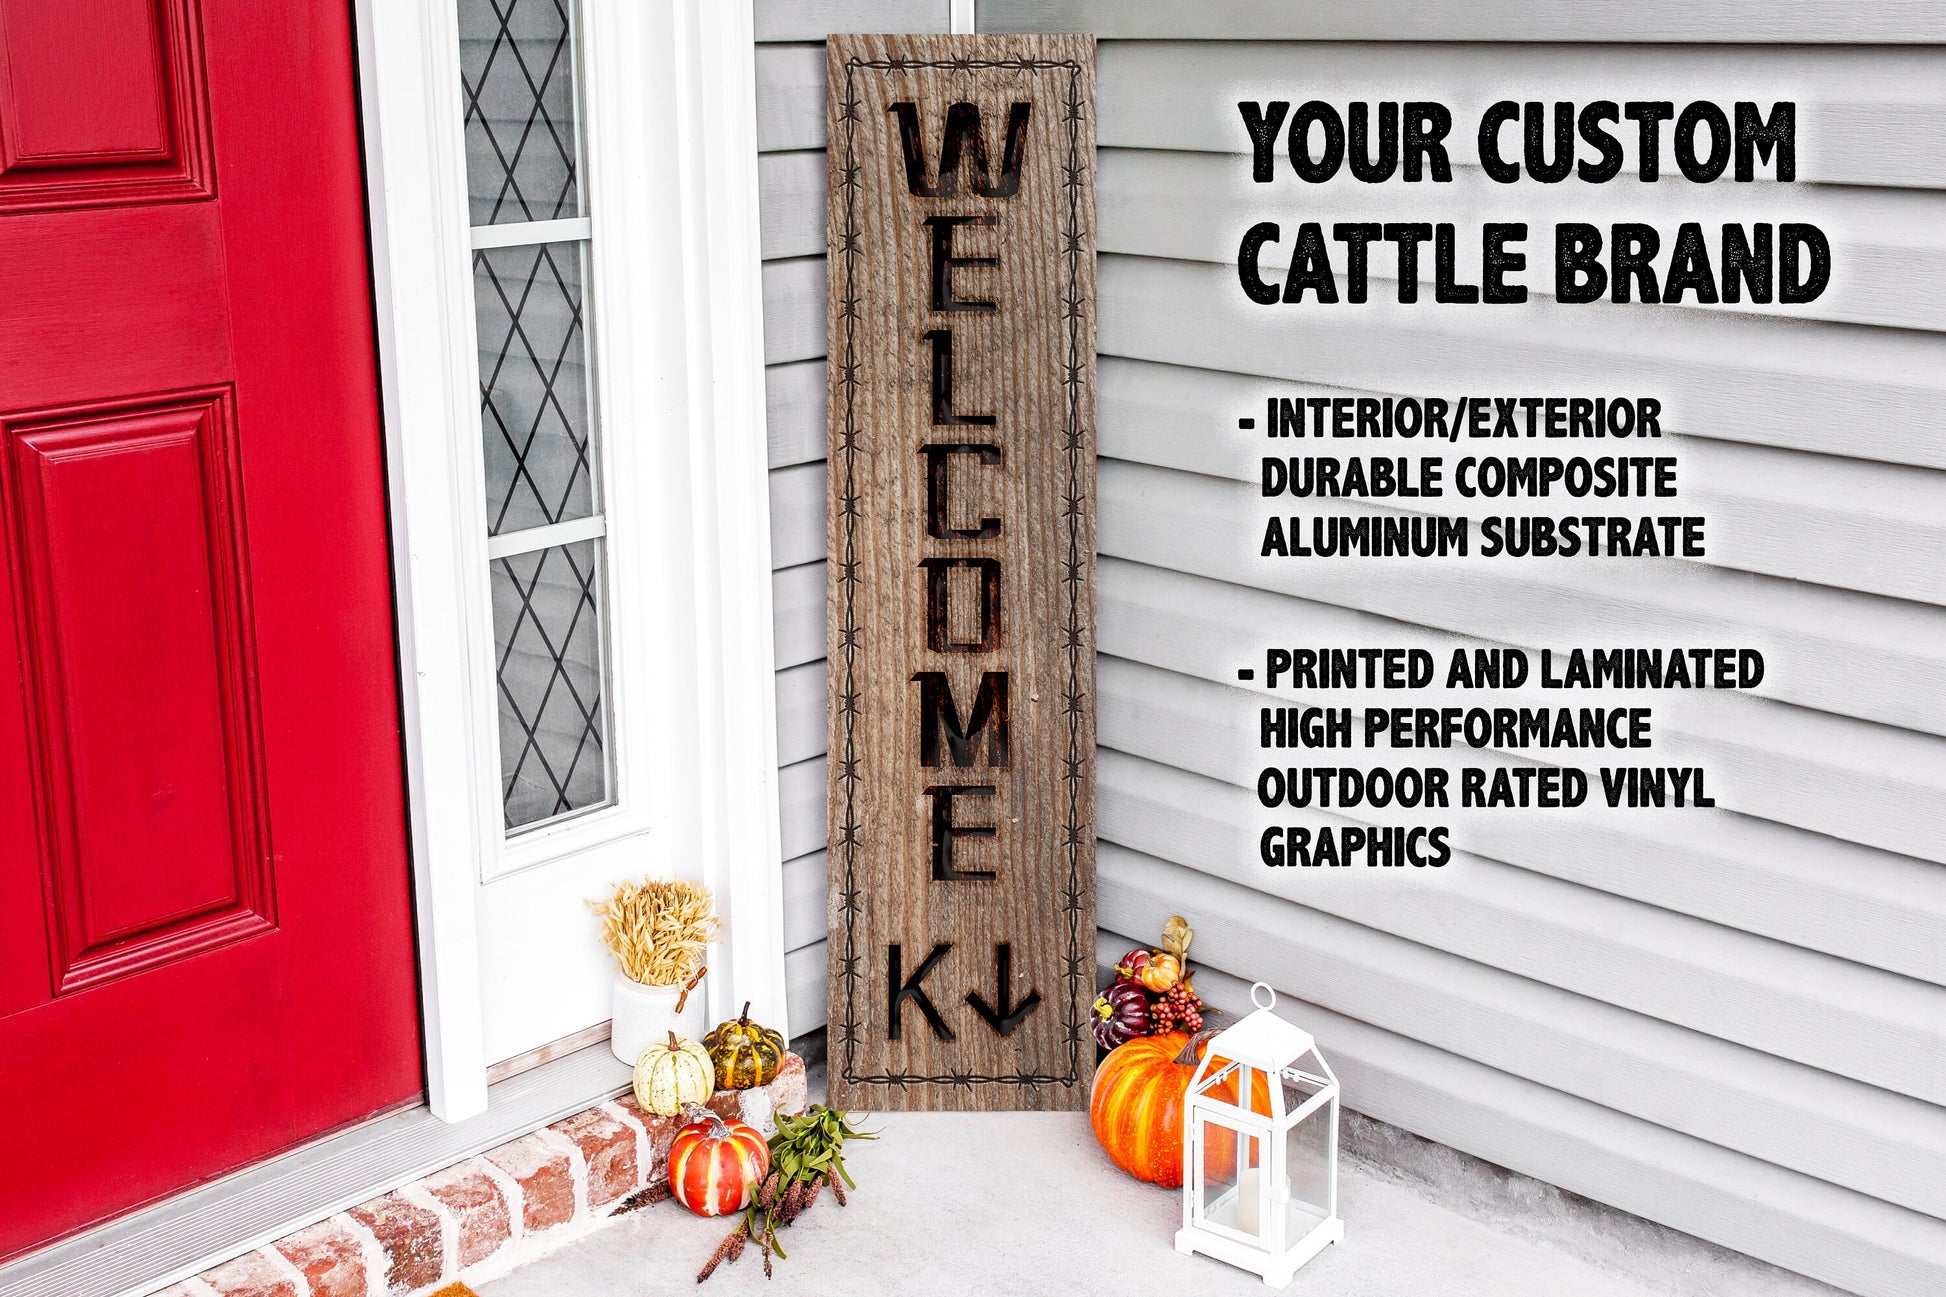 Front Door Welcome Sign Western Themed CUSTOM CATTLE BRAND Burned Wood Outdoor Porch Rustic Entrance Personalized Ranch Door Decor Signs